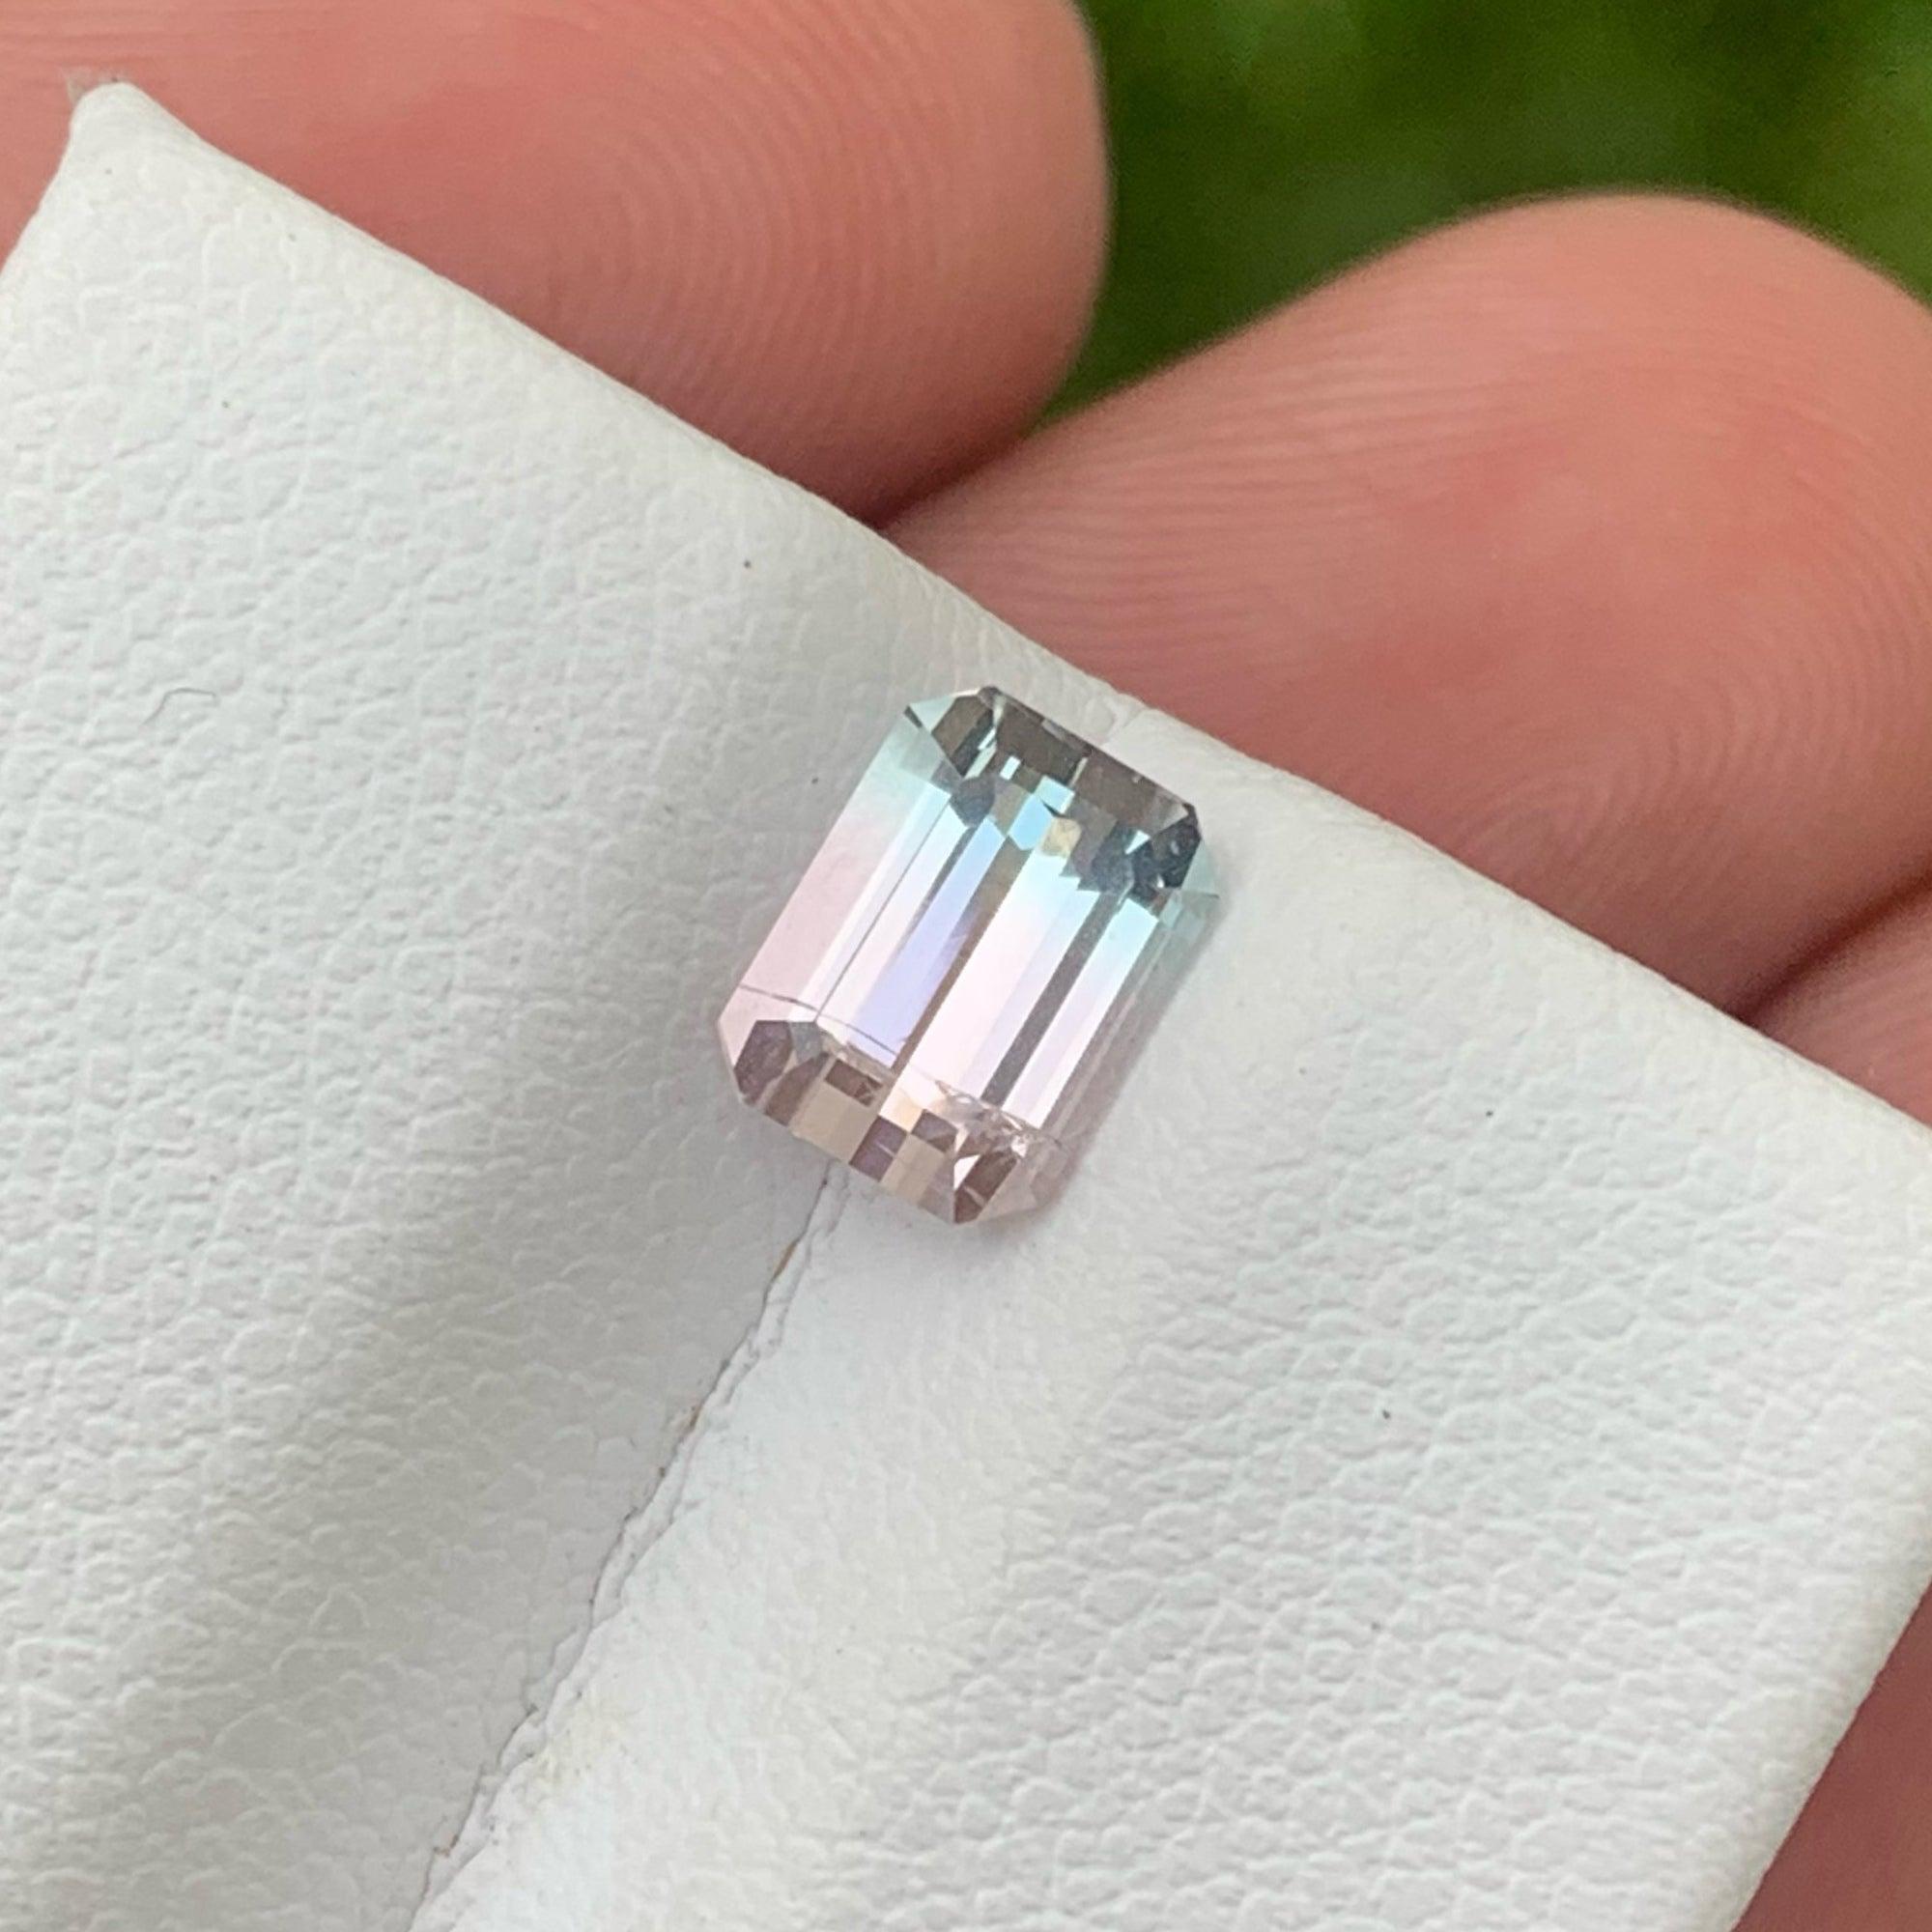 Lovely Bicolor Tourmaline Cut Gemstone, Available For Sale At Wholesale Price Natural High Quality 1.25 Carats Eye Clean Clarity Untreated Tourmaline From Afghanistan.

Product Information:

GEMSTONE TYPE: Lovely Bicolor Tourmaline Cut